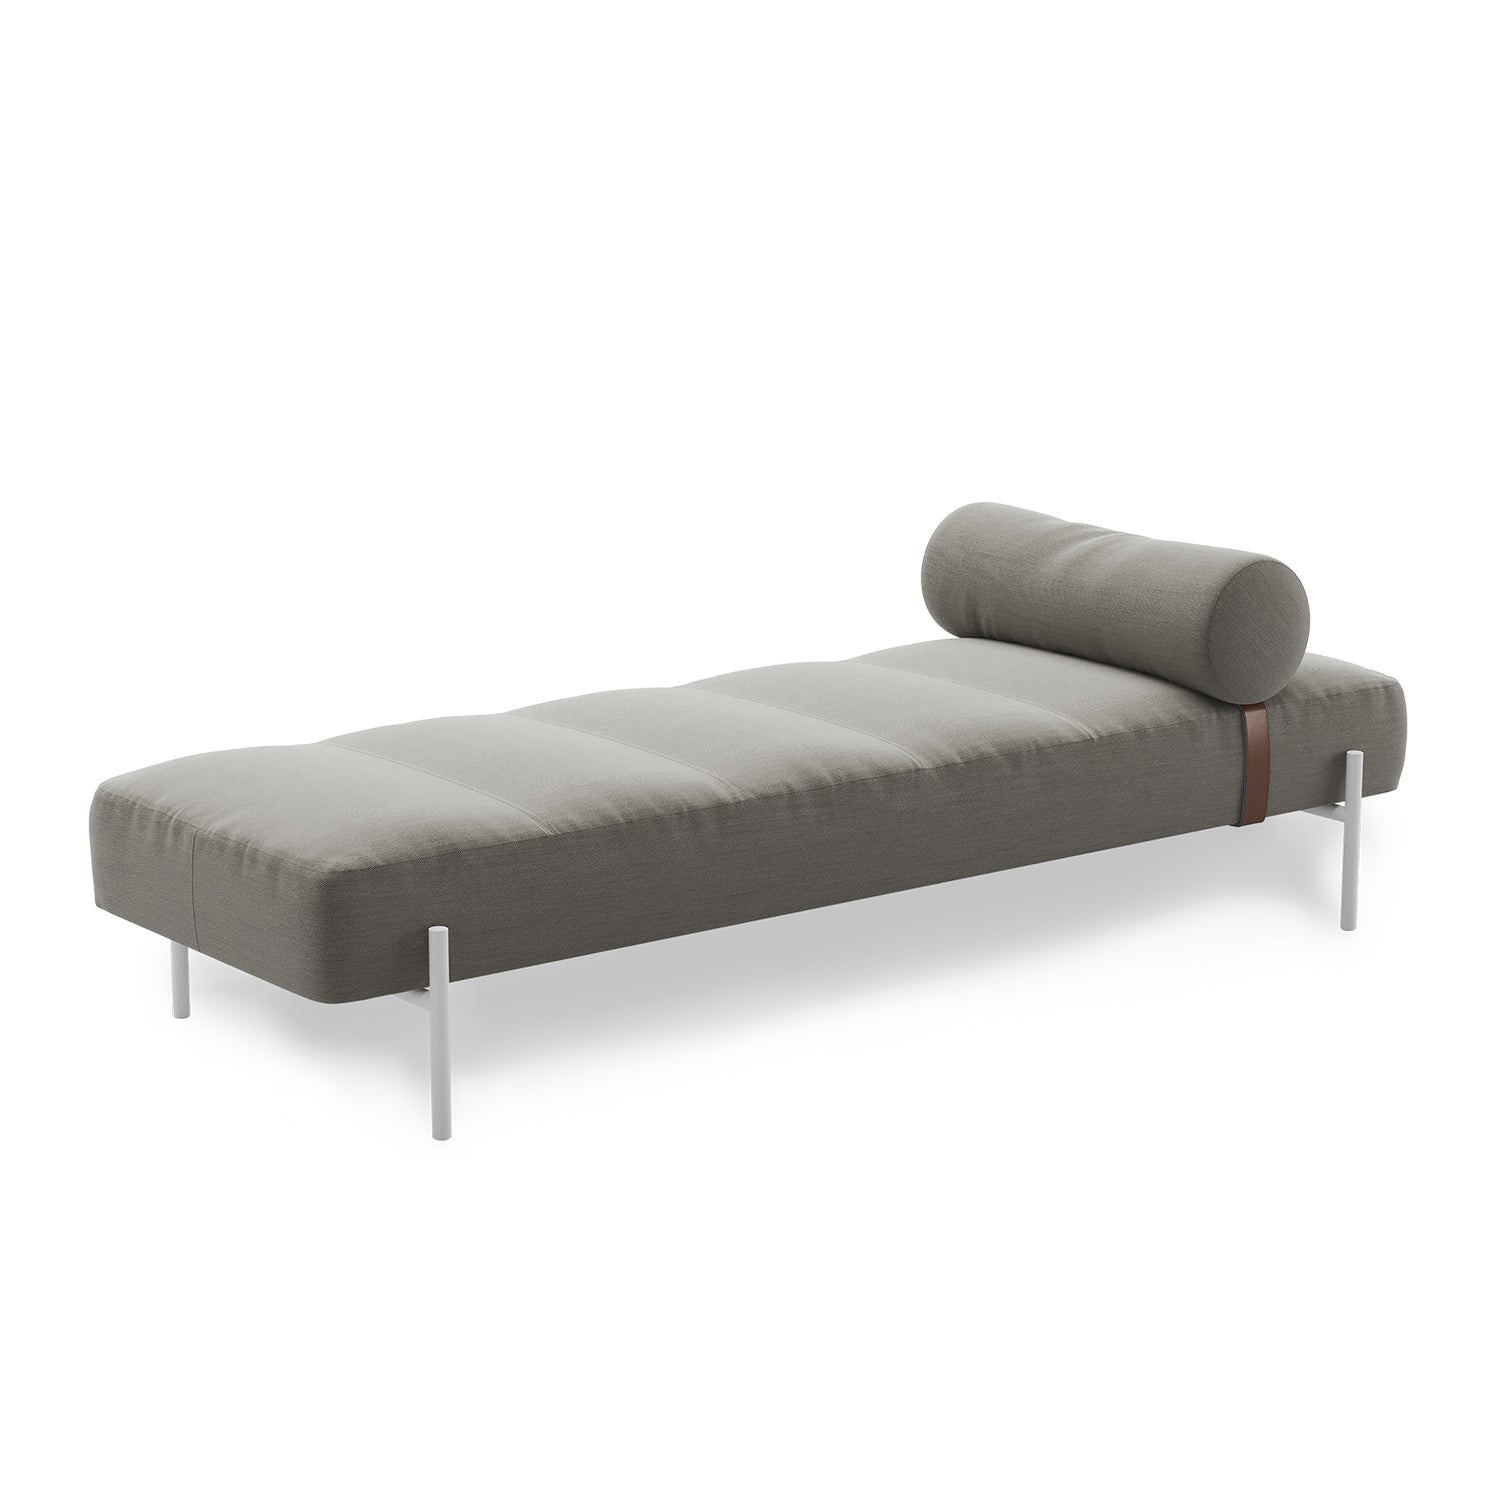 Northern Daybe Daybed in Steelcut Trio 124 and White legs